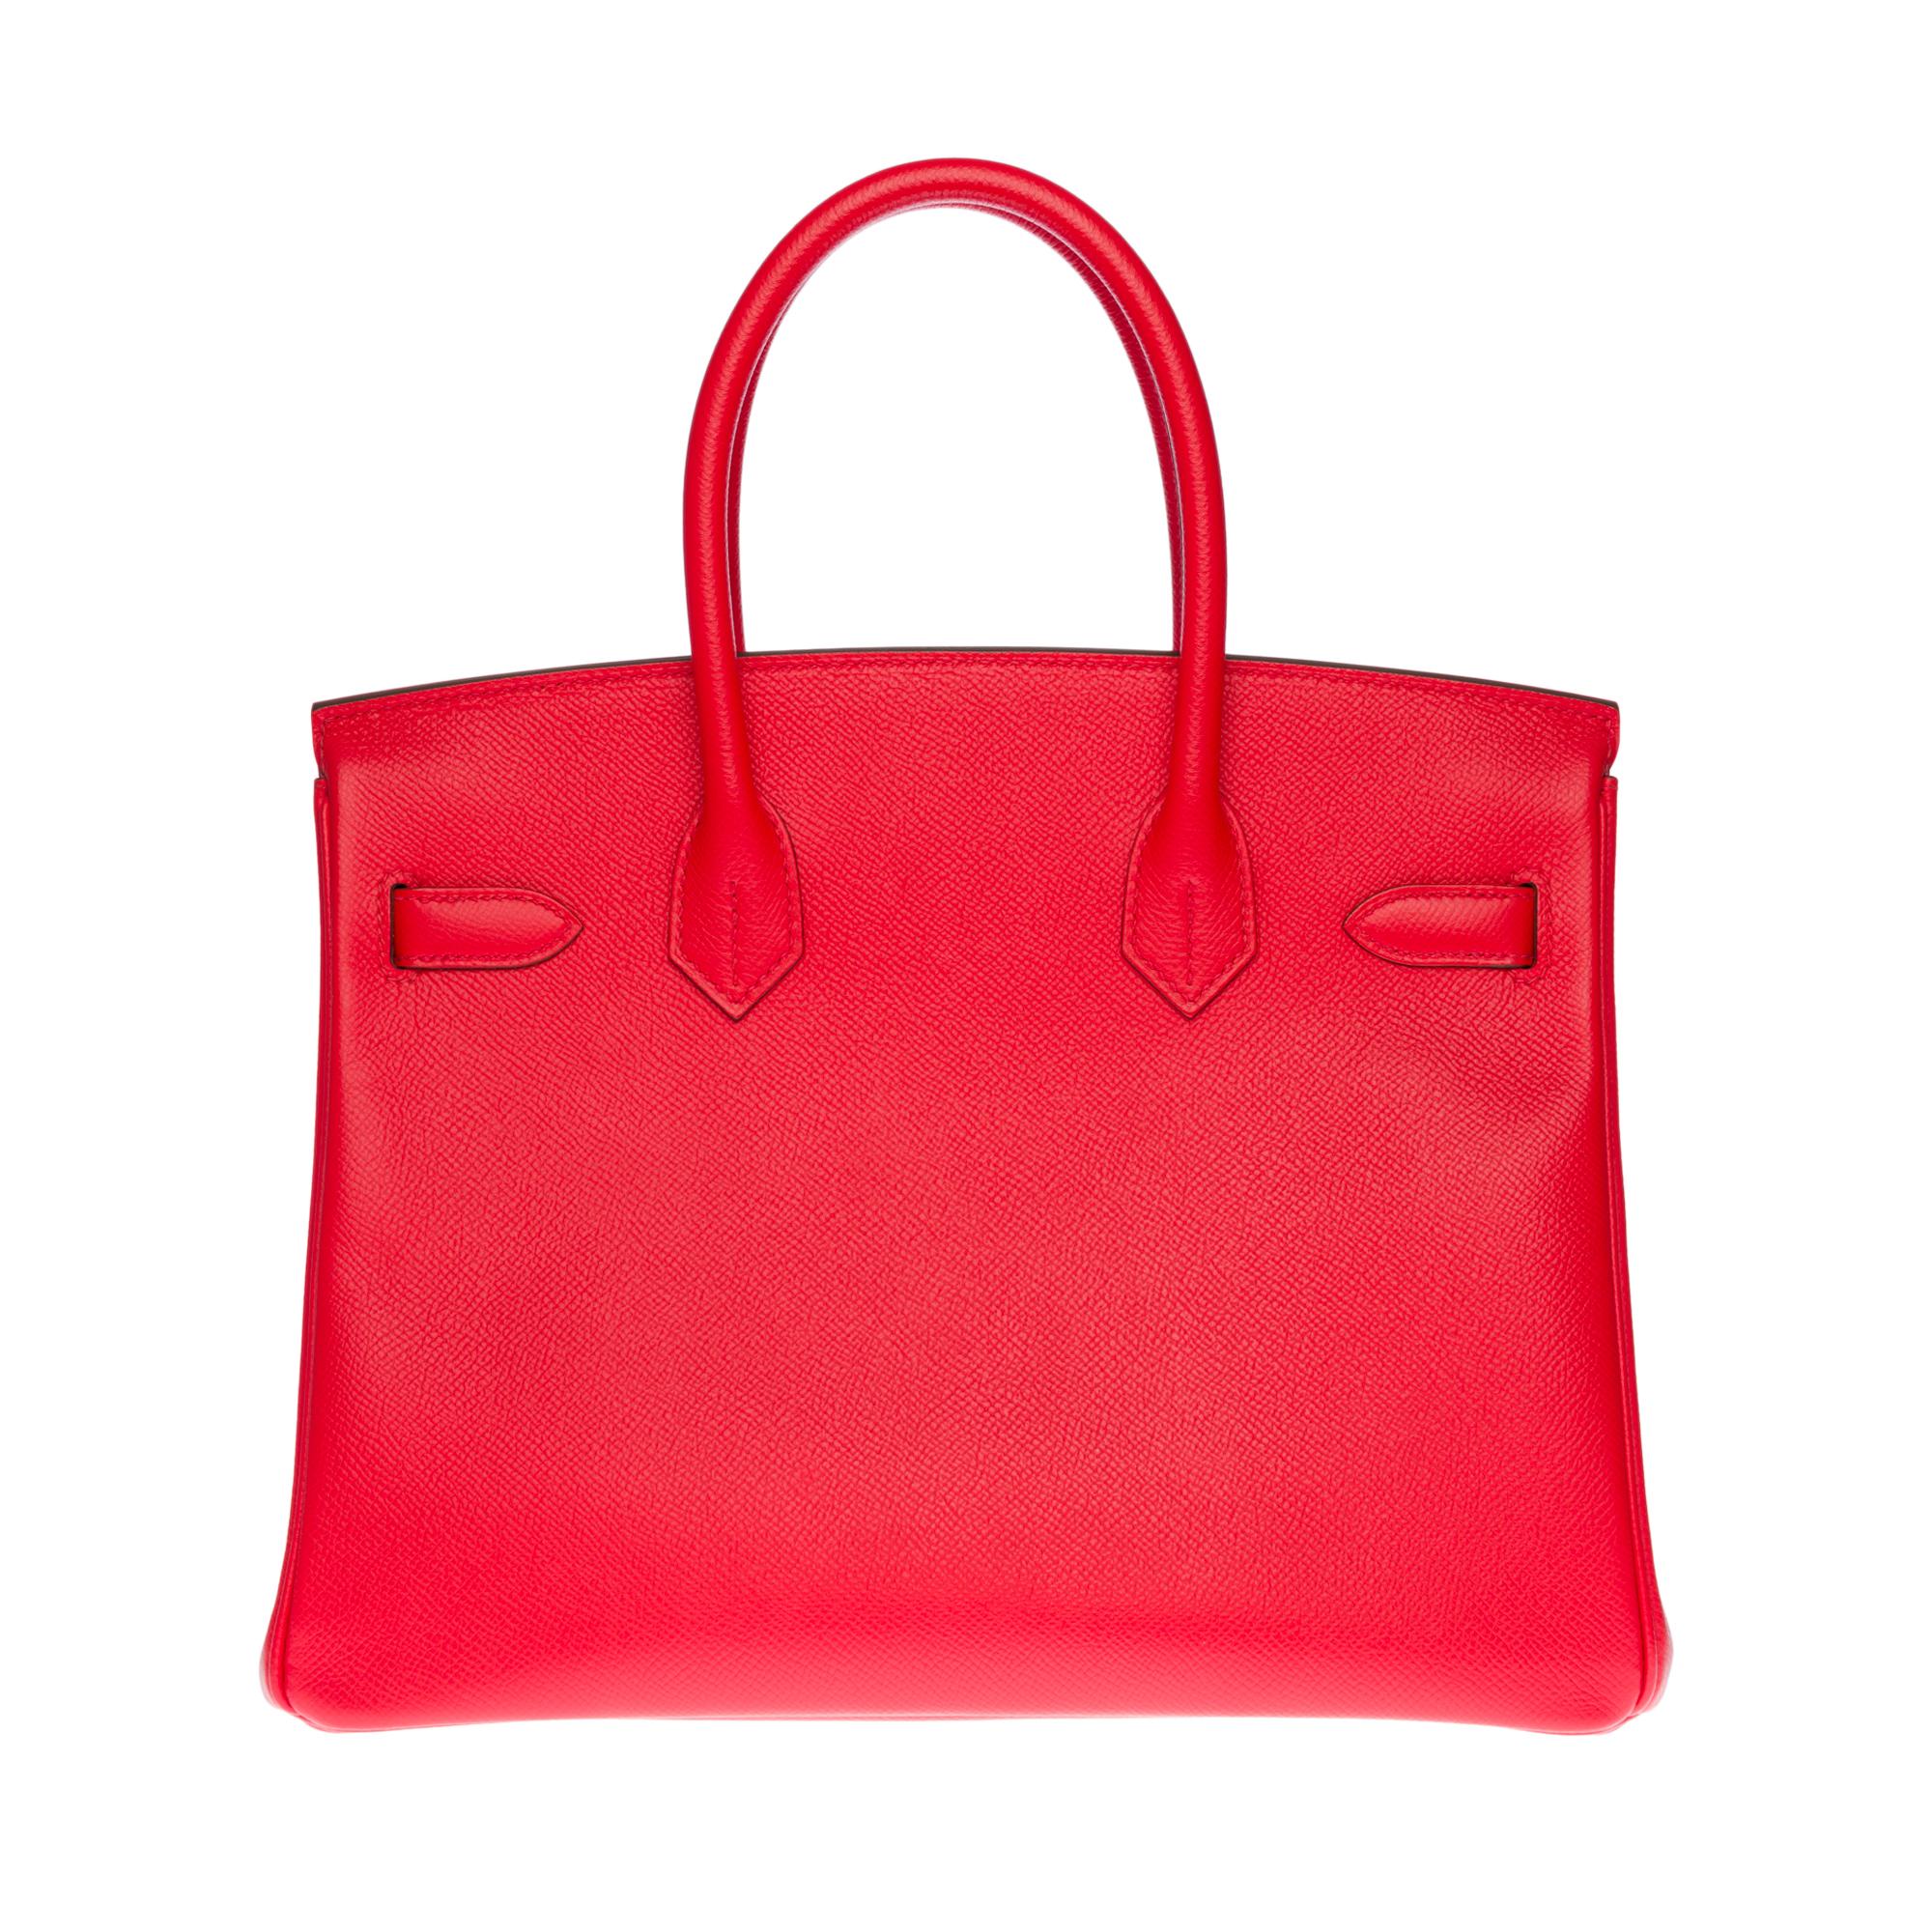 Gorgeous and bright Hermes Birkin 30 handbag in Rouge de Coeur Epsom leather, palladium silver metal hardware, double handle in red leather allowing a handhold
Flap closure
Lining in red H leather, one zip pocket, one patch pocket
Signature: 